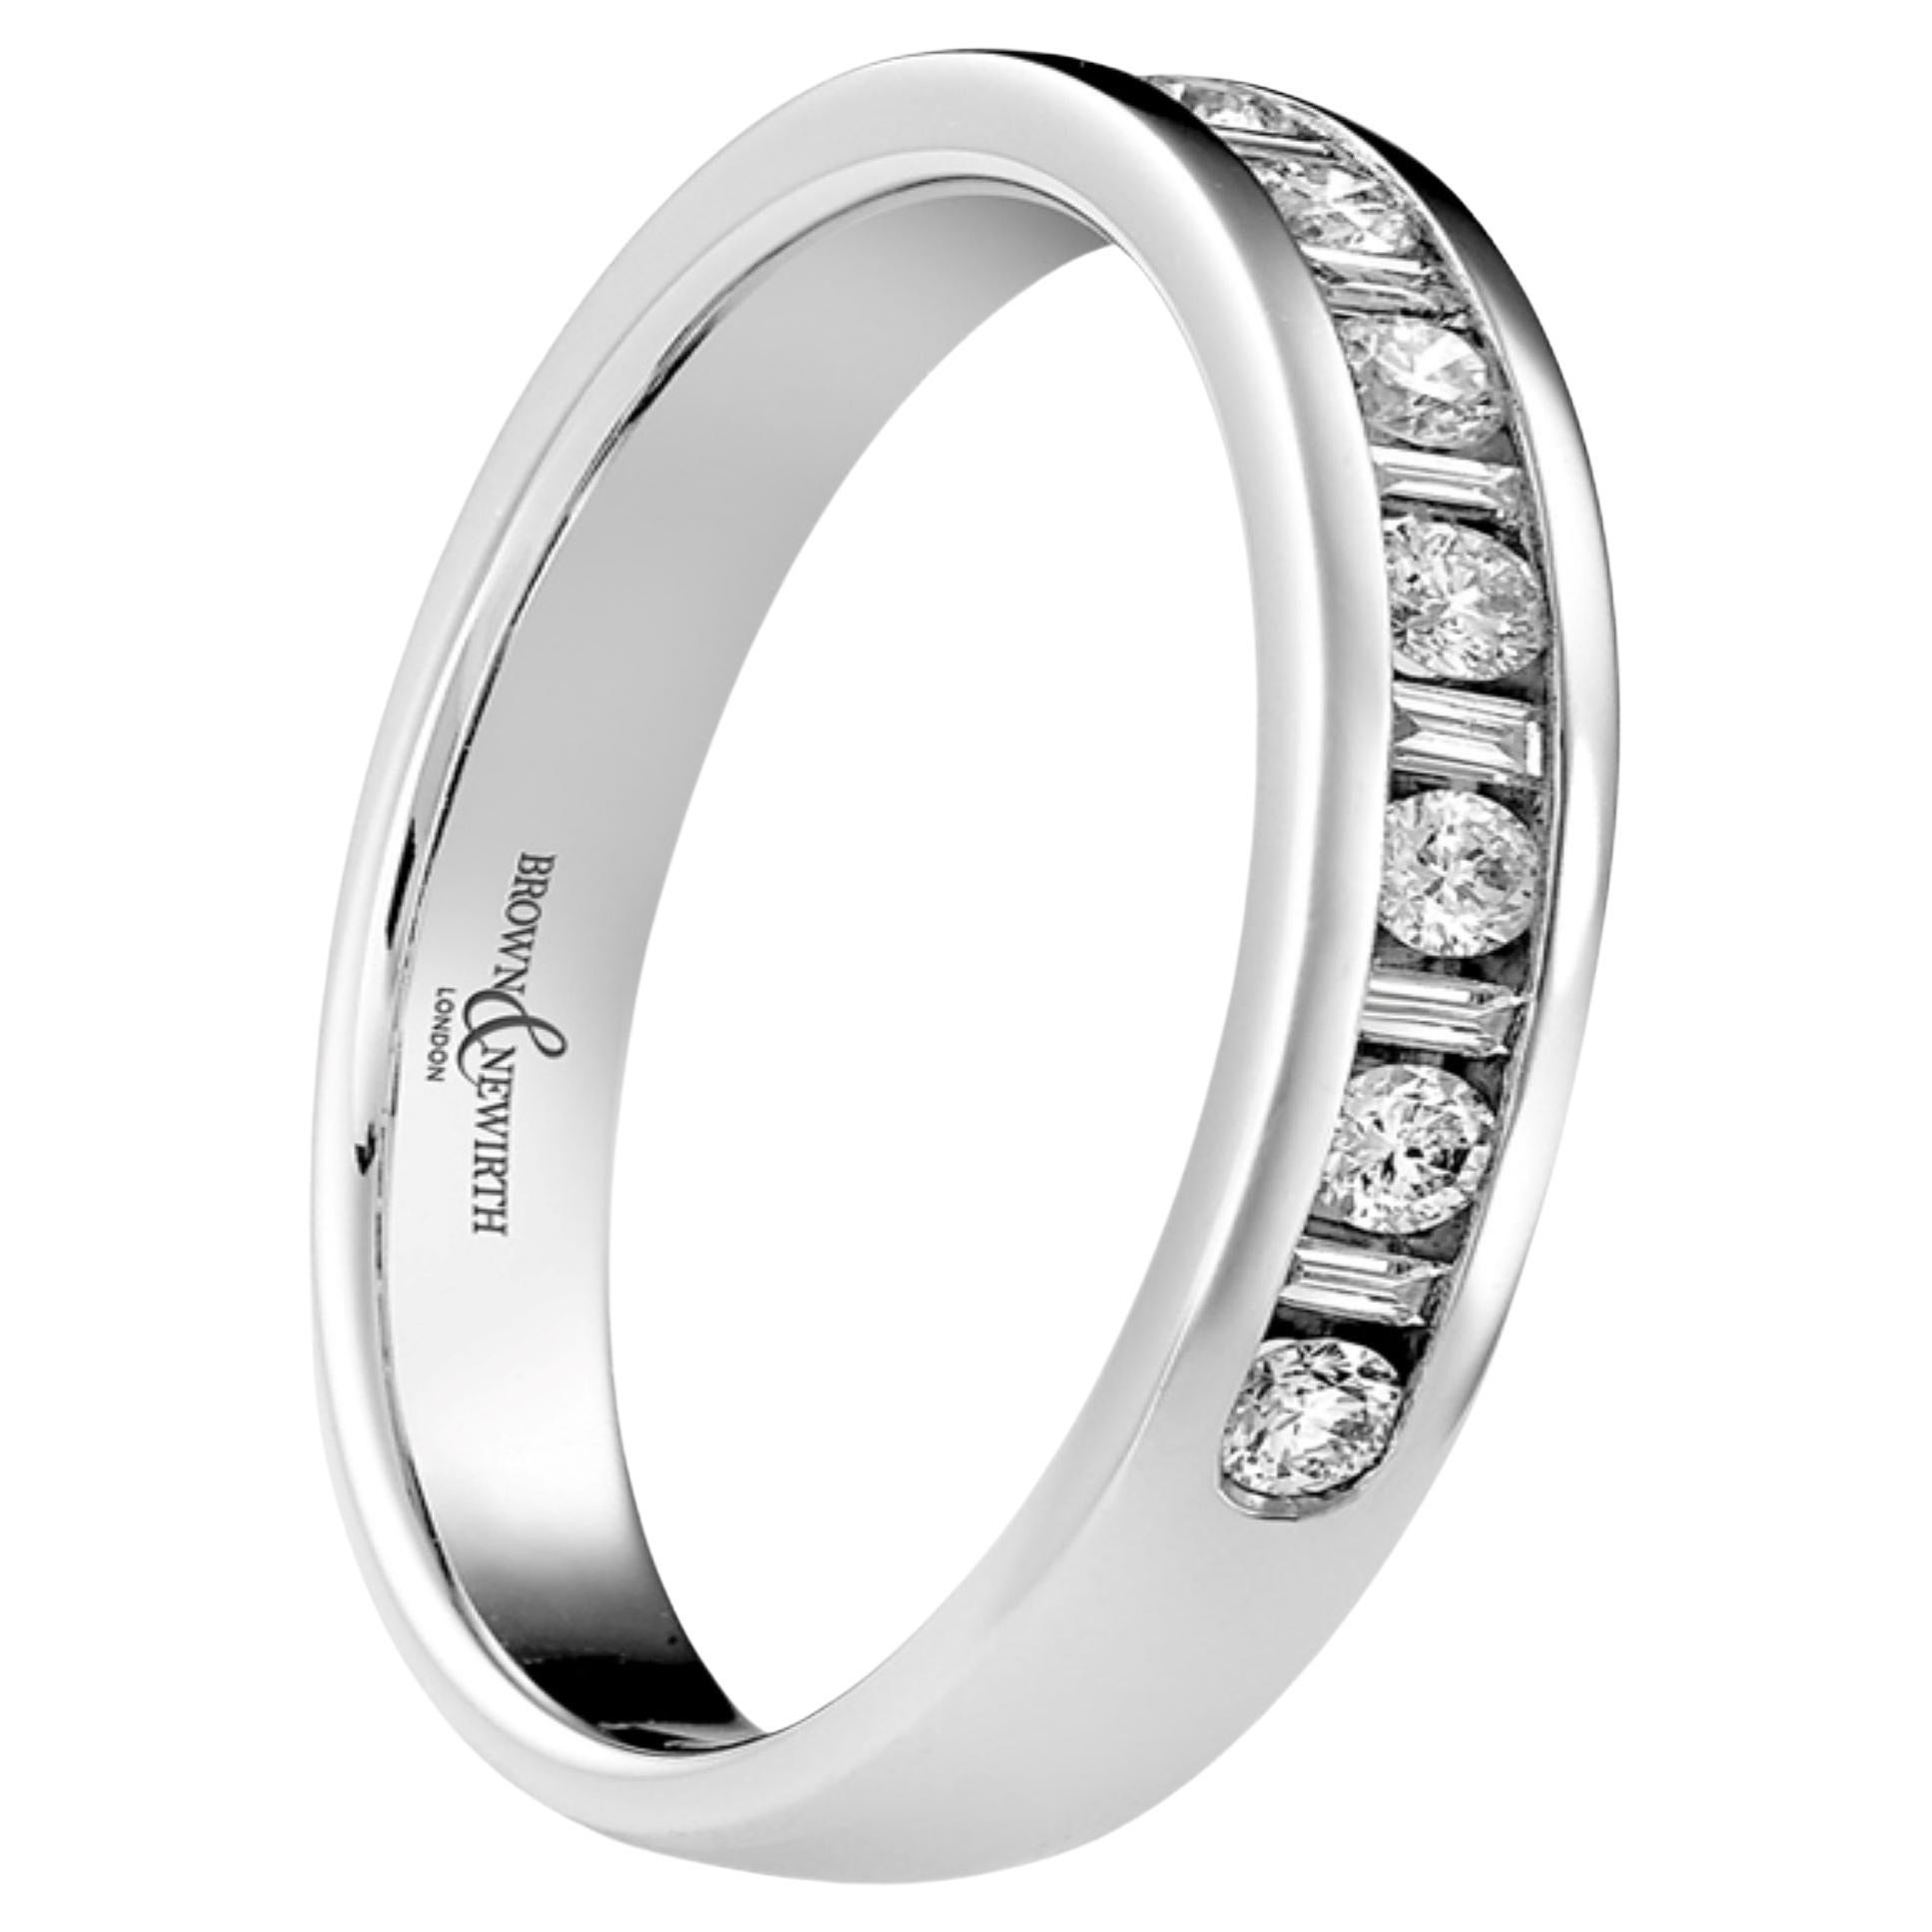 Handcrafted Platinum Diamond Band Set with a Mix of Baguette & Round Brilliant